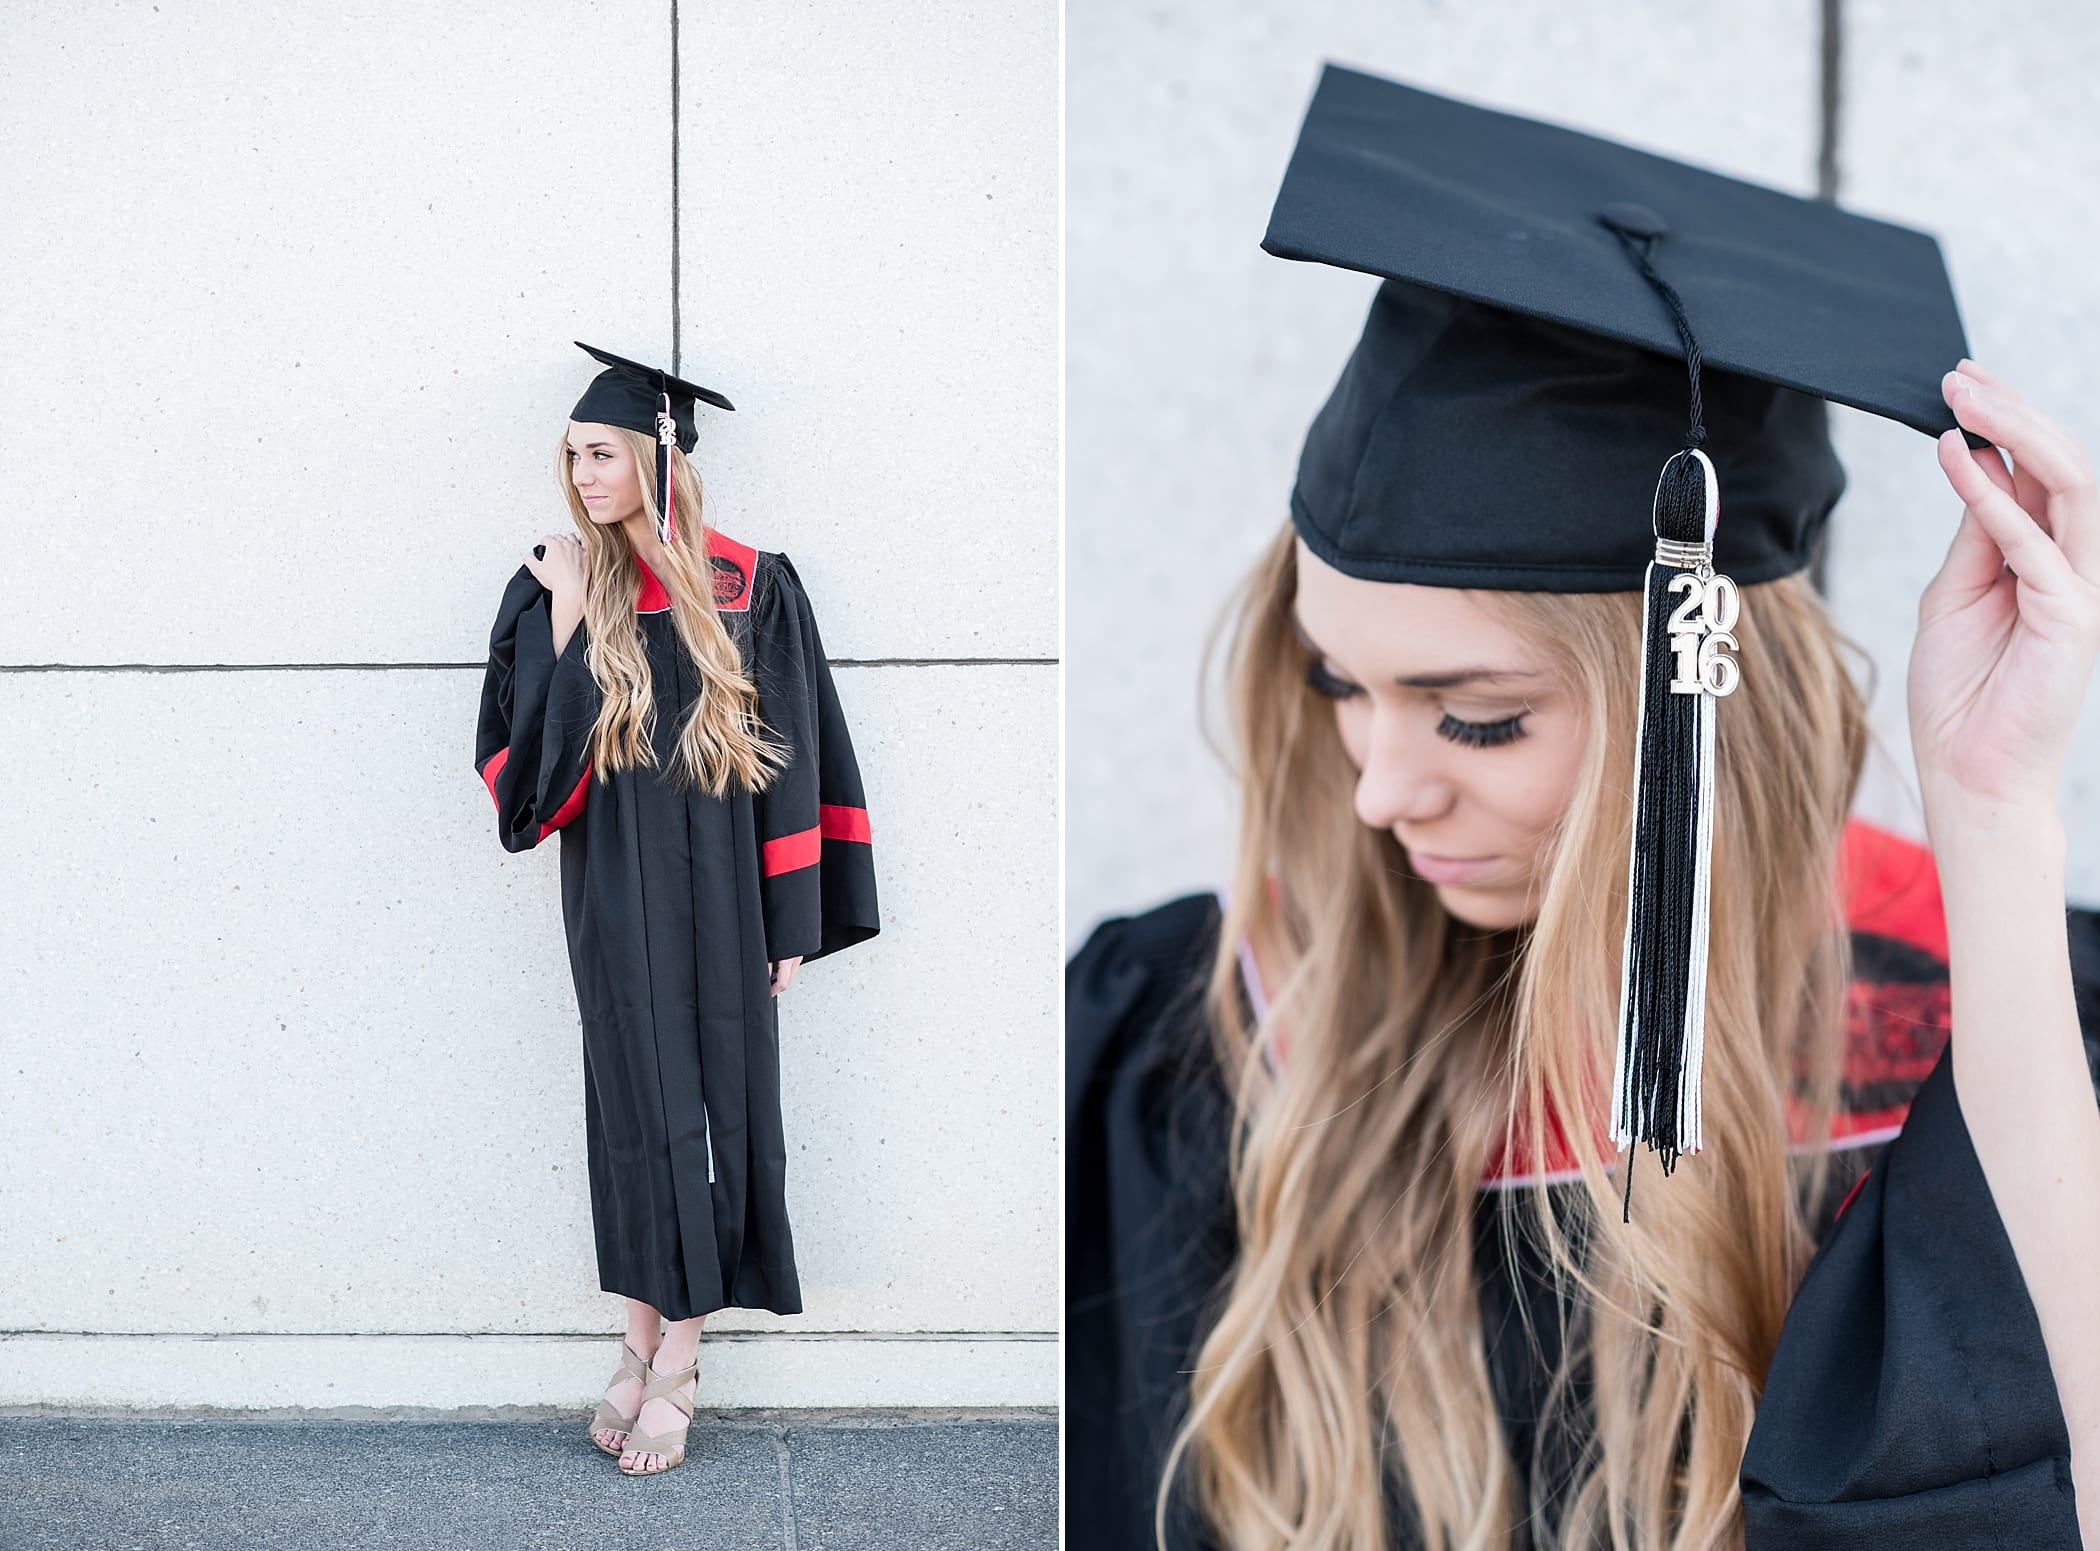 Senior Girl cap and gown Graduation Photos Downtown by Michelle & Logan